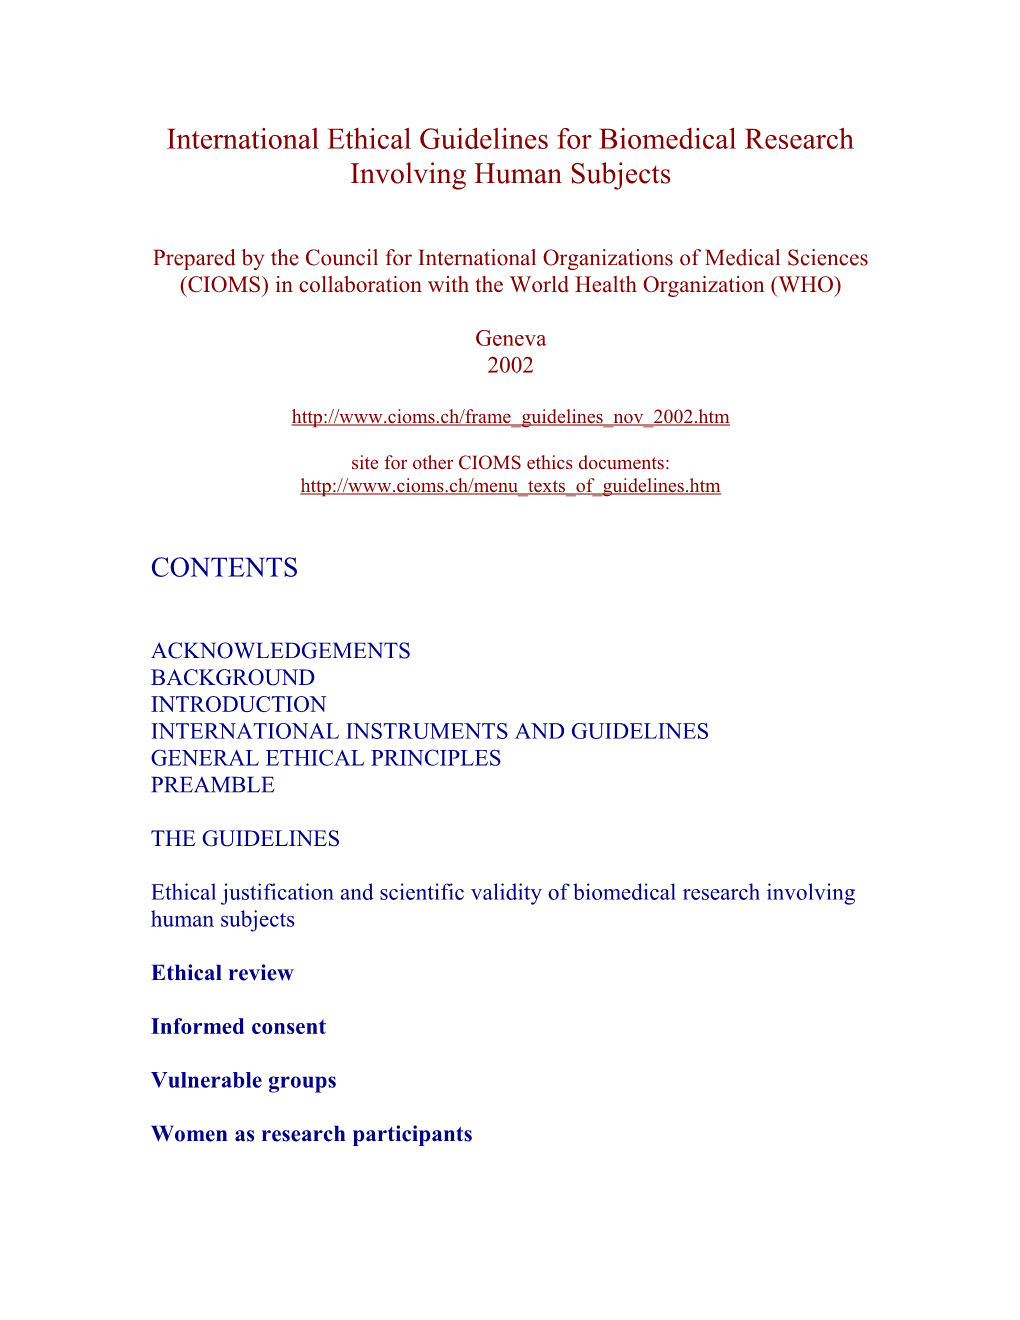 International Ethical Guidelines for Biomedical Research Involving Human Subjects